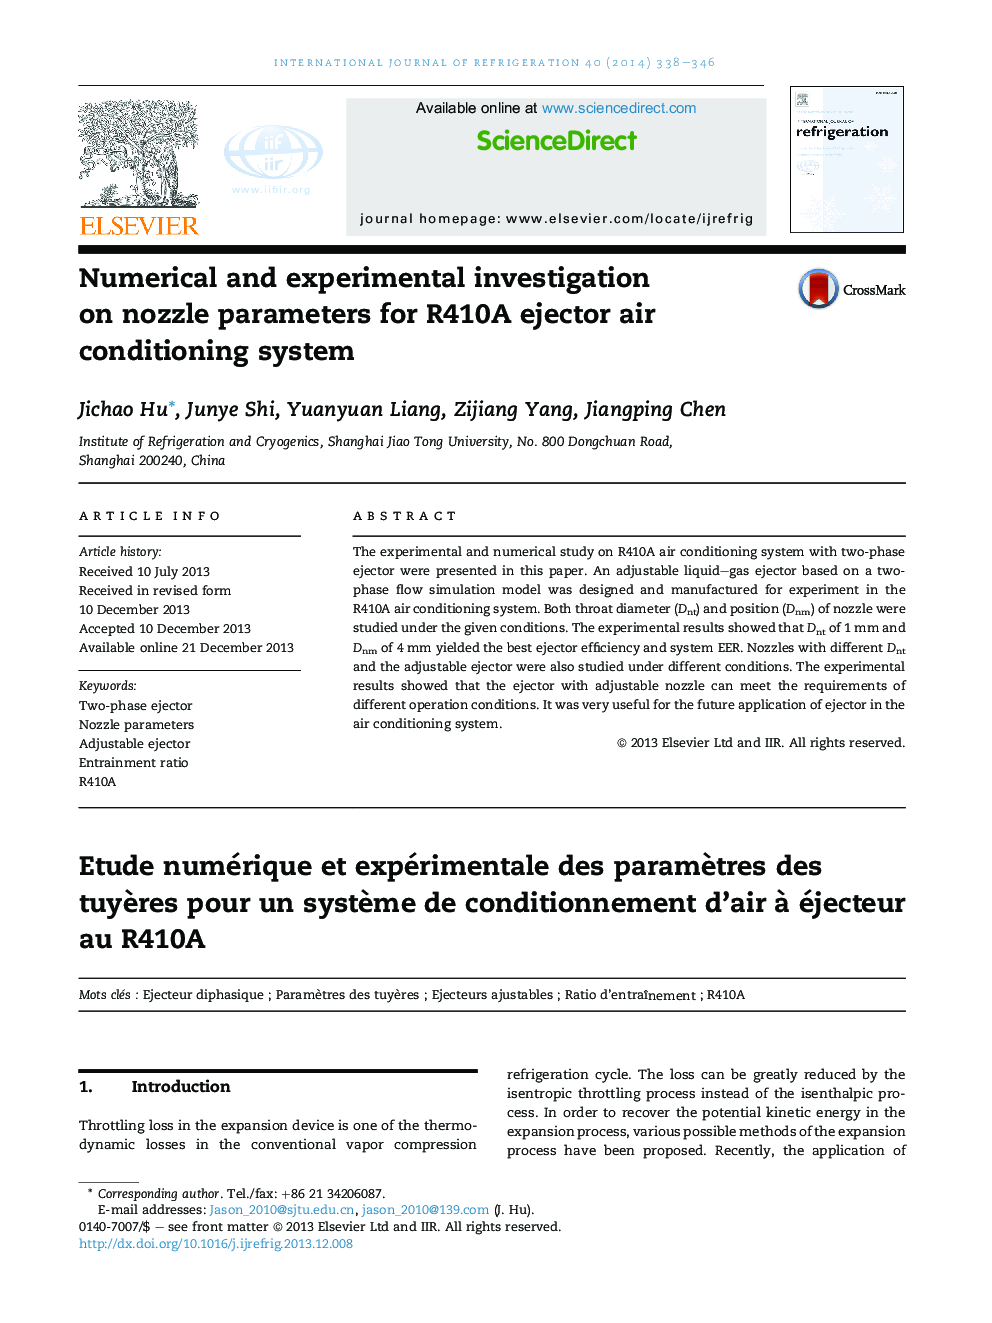 Numerical and experimental investigation on nozzle parameters for R410A ejector air conditioning system